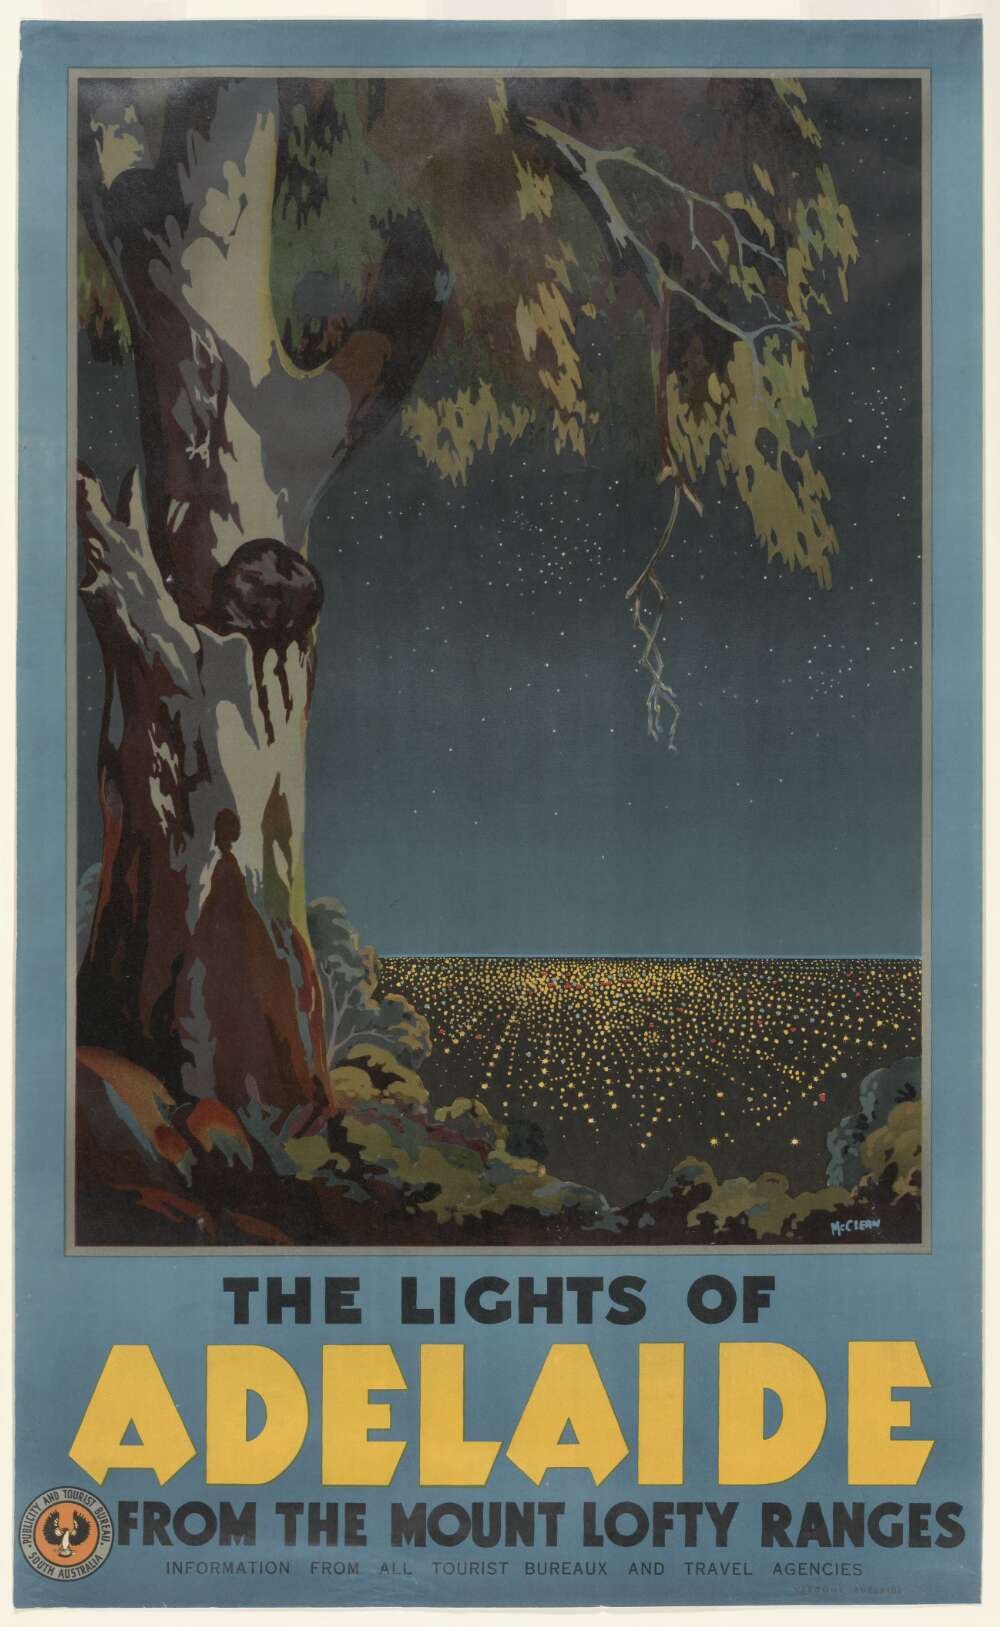 McLean, The Lights of Adelaide from Mount Lofty Ranges, 1930s, nla.cat-vn210491